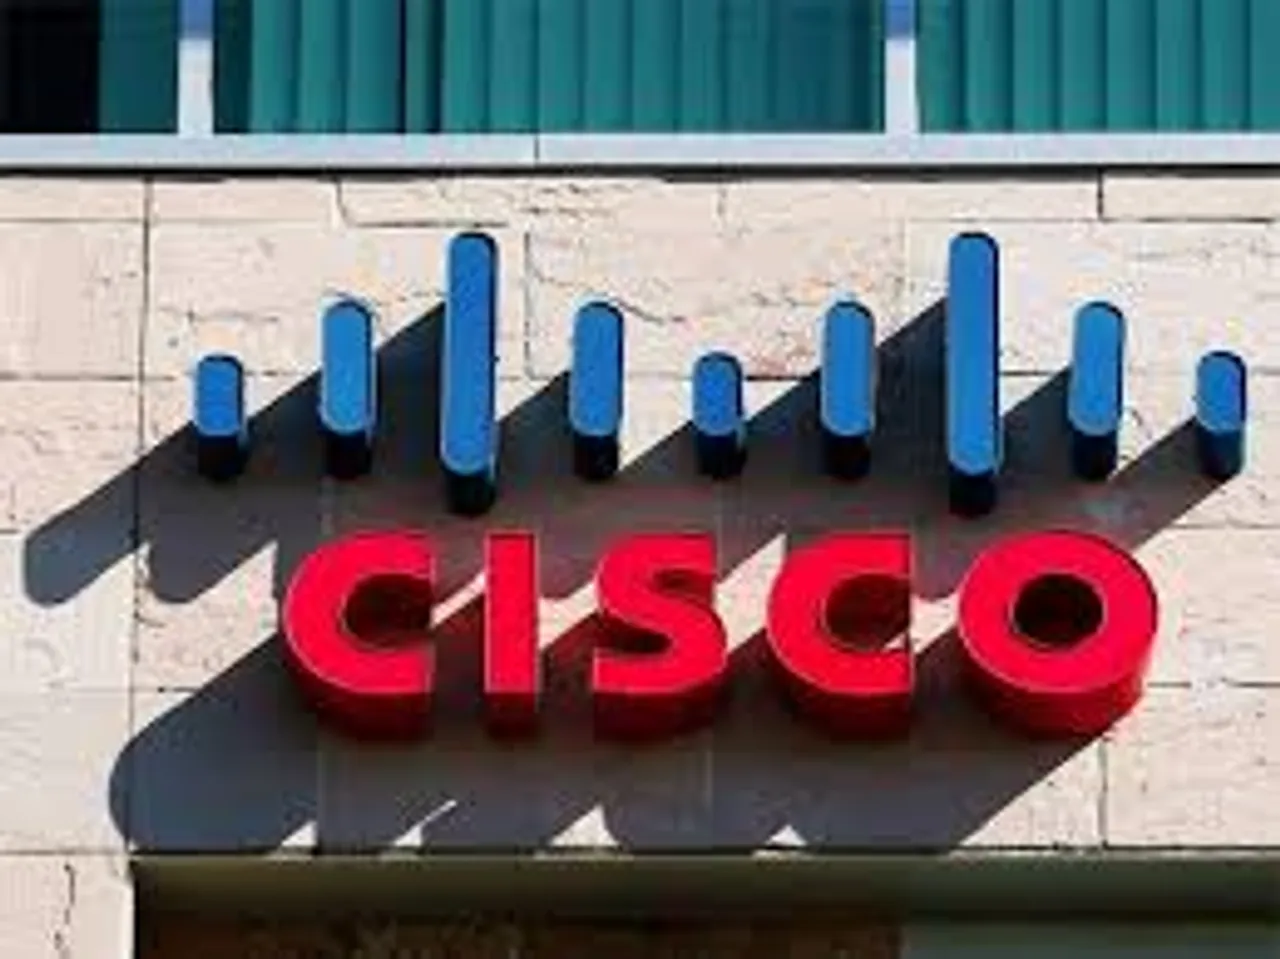 Jaipur as the First Lighthouse City in South Asia: CISCO